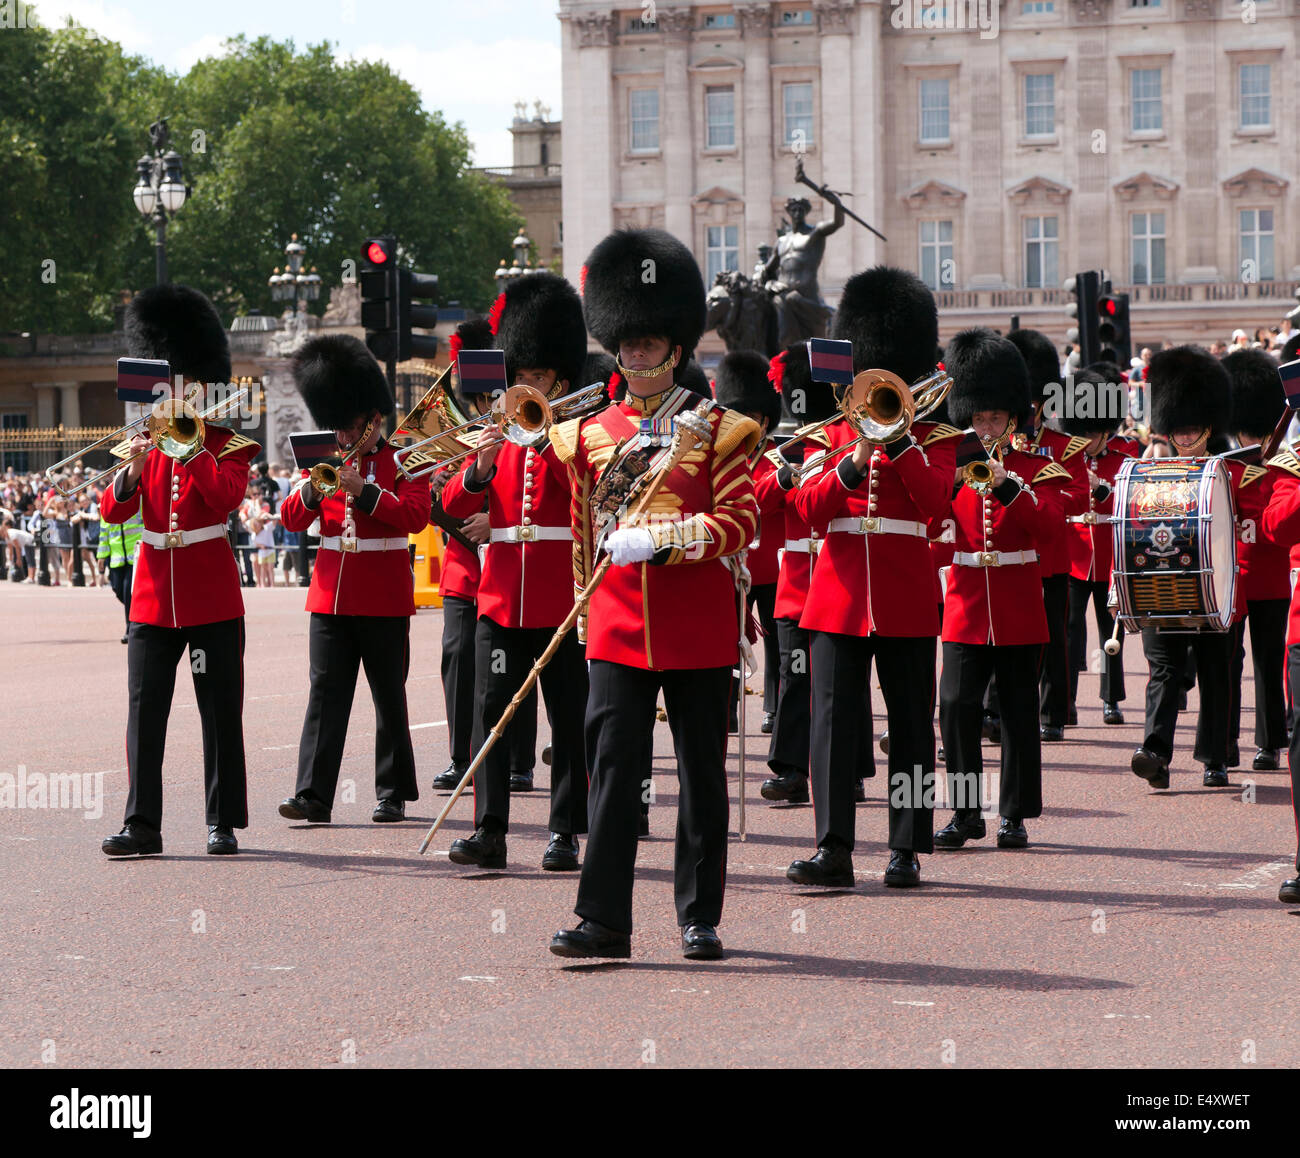 The Band of the Coldstream Guards marching away from  Buckingham Palace down the Mall.Coldstream Guards, Band, Musicians, Soldie Stock Photo